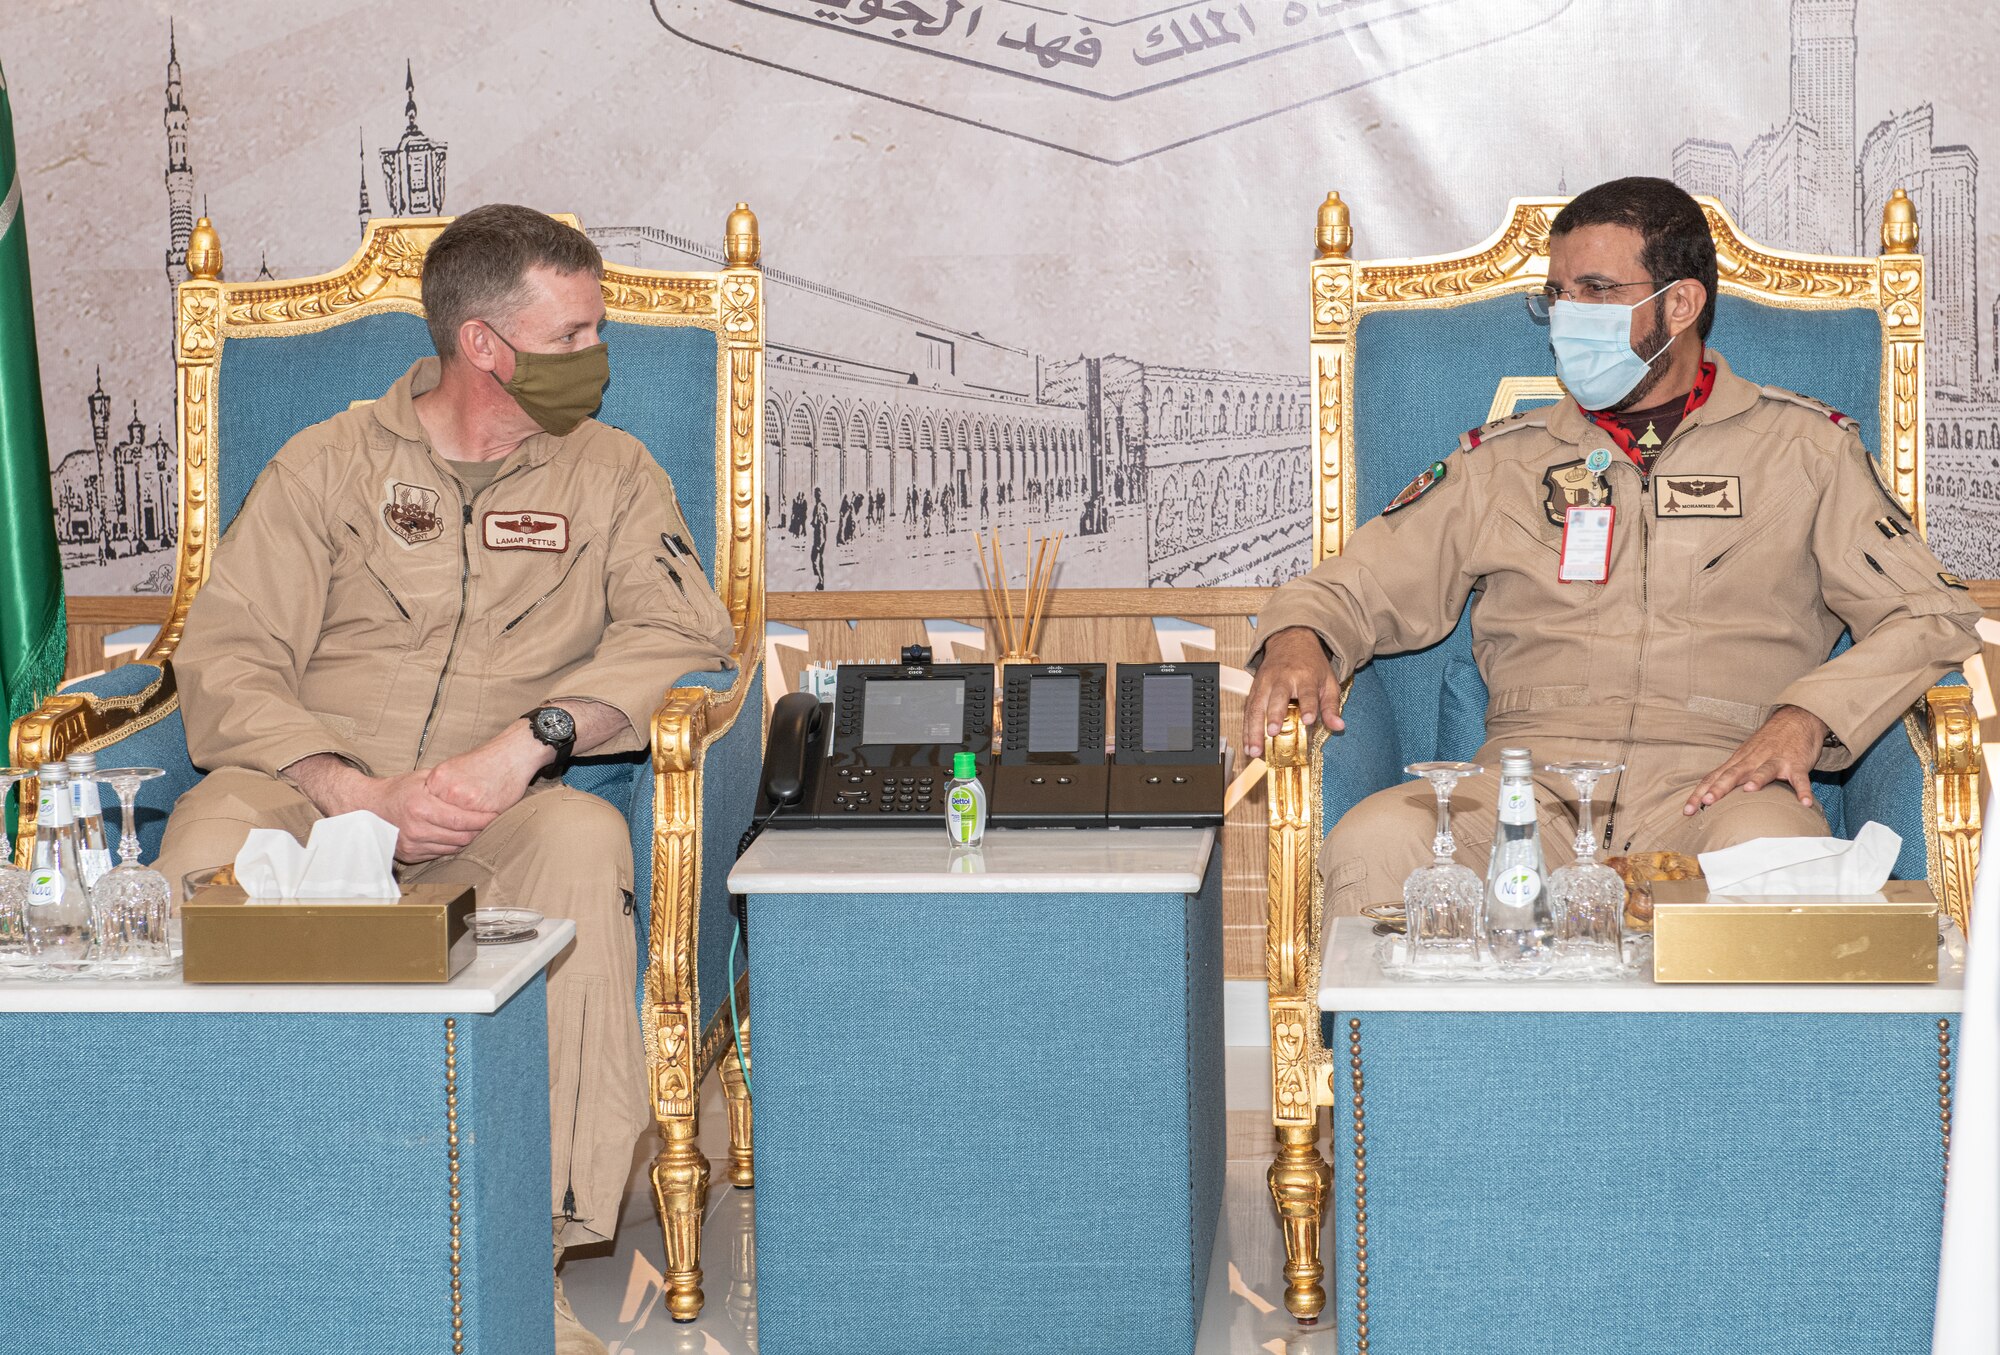 Brig. Gen. Evan Pettus, 378th Air Expeditionary Wing commander, speaks with the Royal Saudi Air Force King Fahad Air Base commander during an Agile Combat Employment capstone event Feb. 27, 2021, at an airbase in the Kingdom of Saudi Arabia.